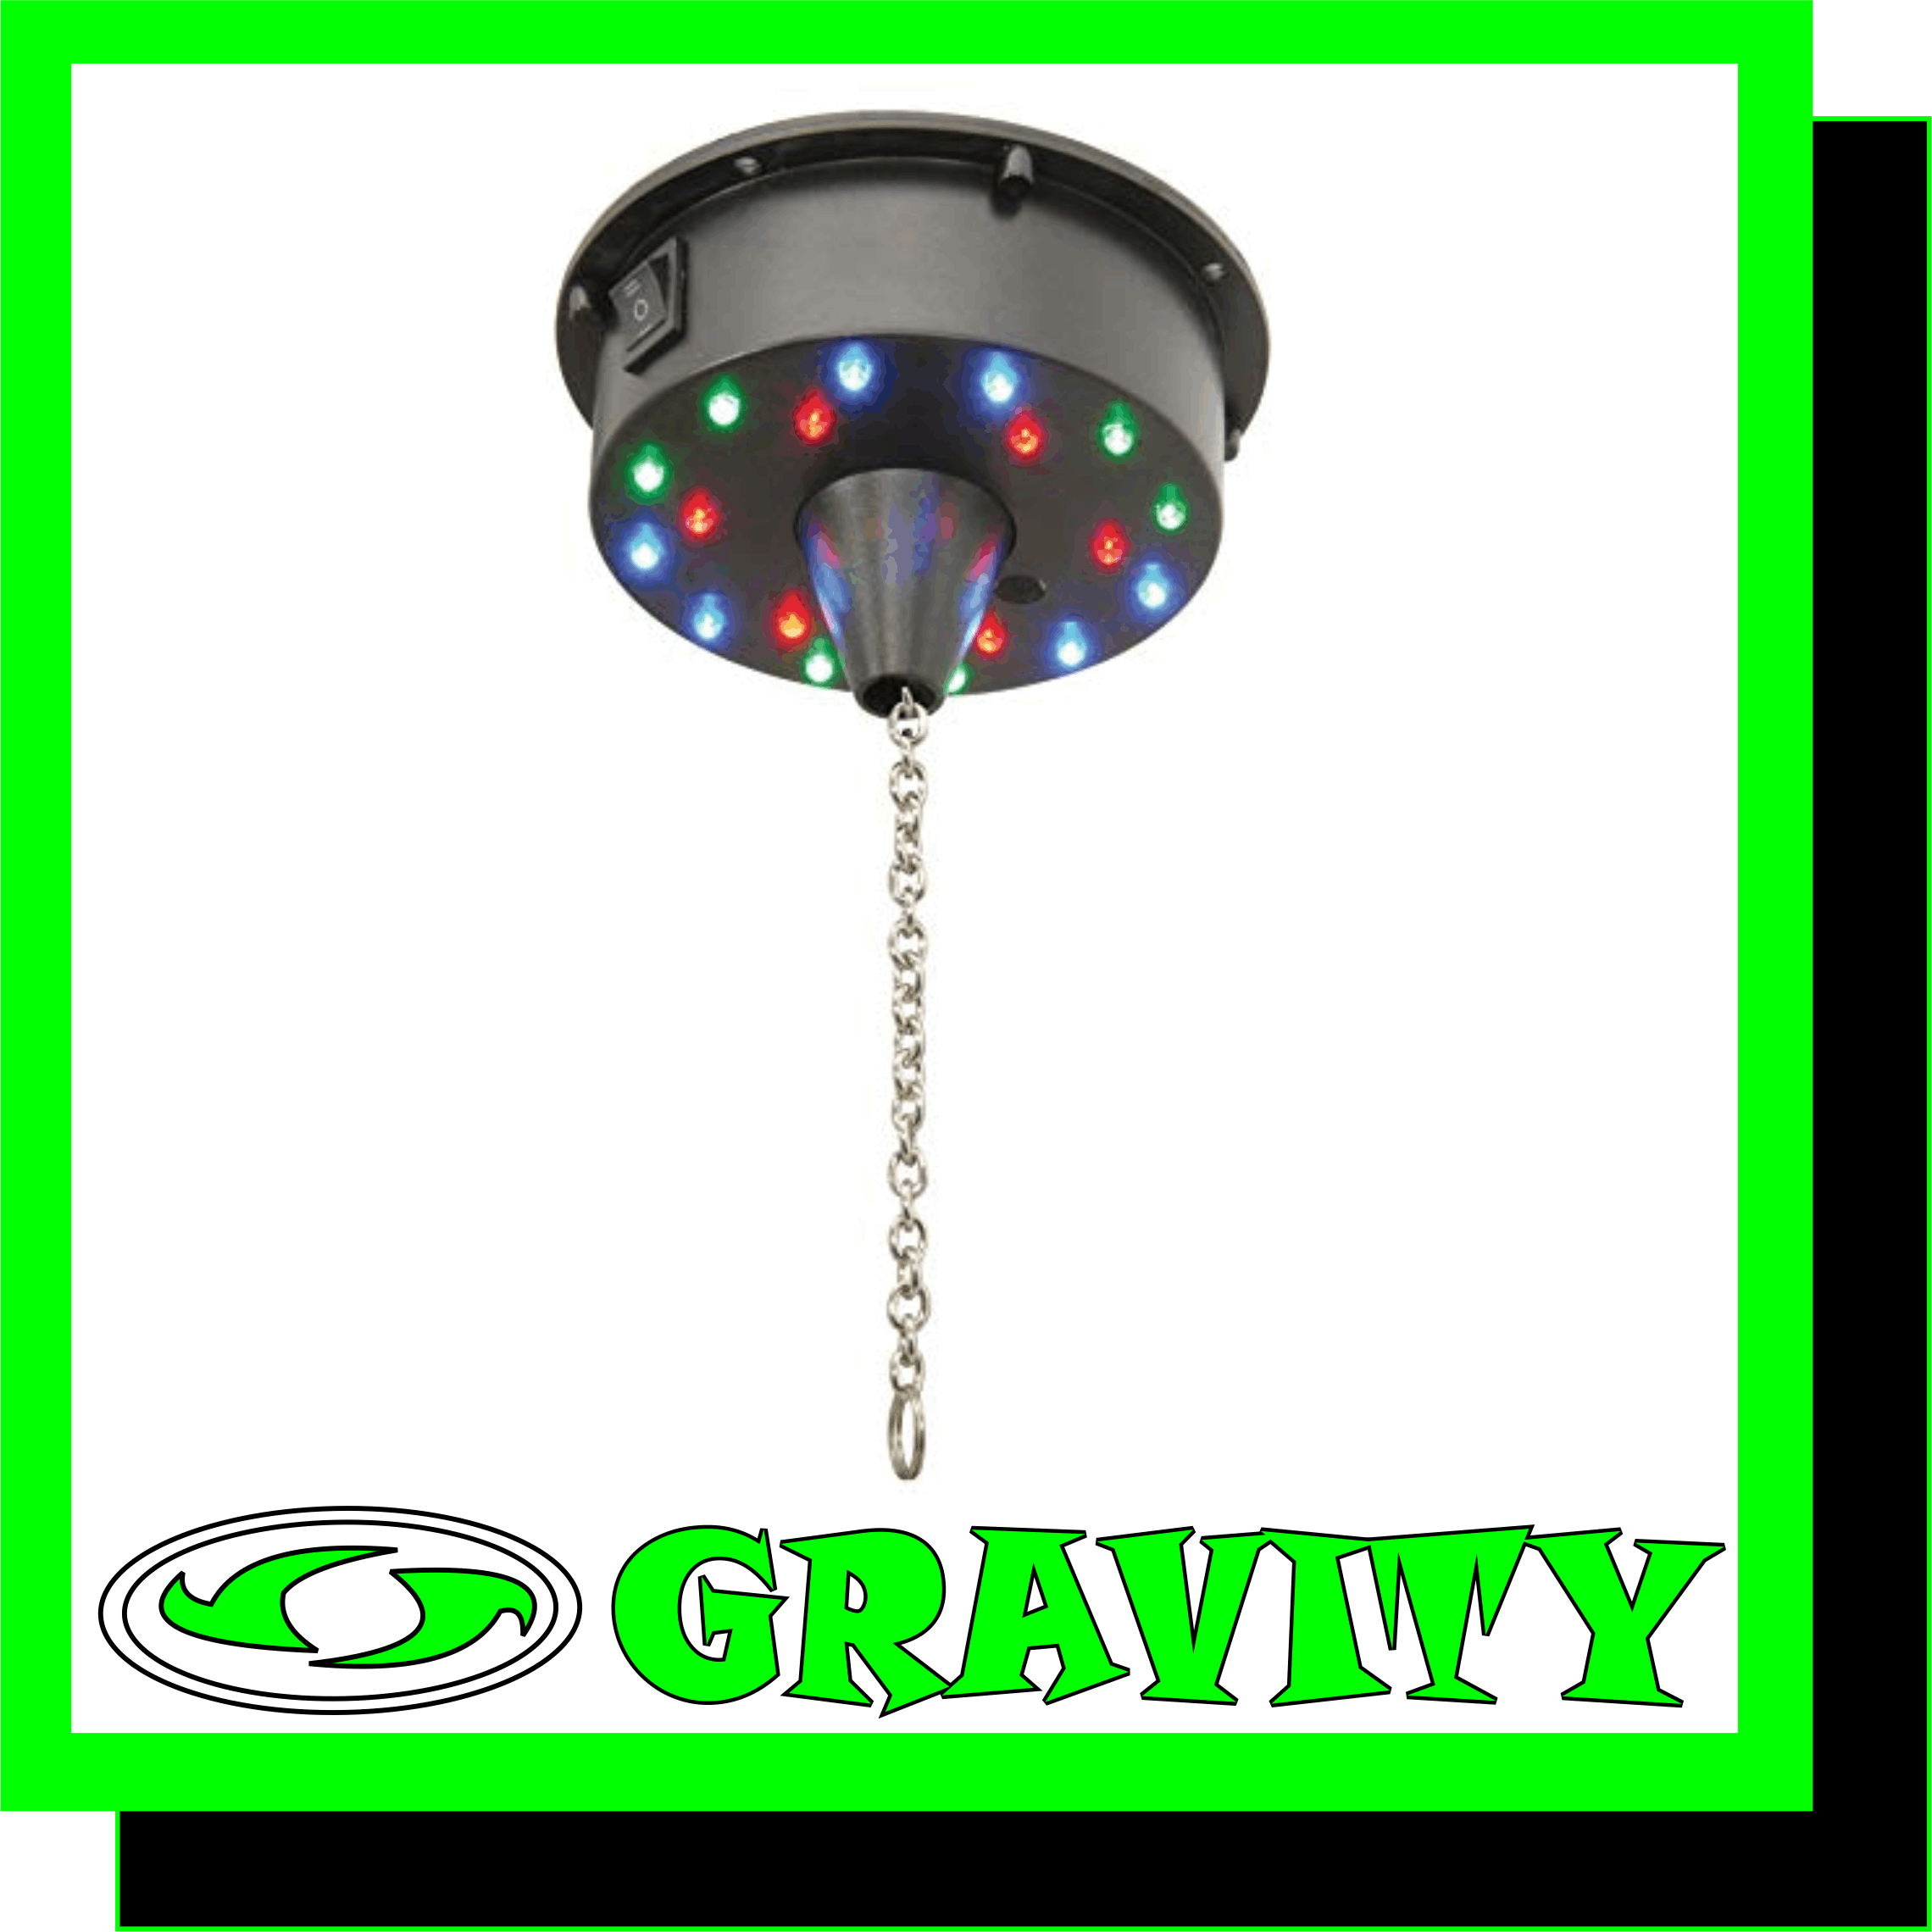 BATTERY OPERATED LED MIRROR BALL MOTOR 18 LEDS  Product Description A battery powered Low-noise motor for mirror balls up to 2 kg fitted with 18 coloured LEDs. Especially in the dark this produces a stunning effect. Stand alone or sound activated.  -No. of LEDs : 18 -Rotation per minute : 5~6 rpm -Max. weight load : 2.0kg -Power supply : 4.5V : 3xAA -Weight : 200gr